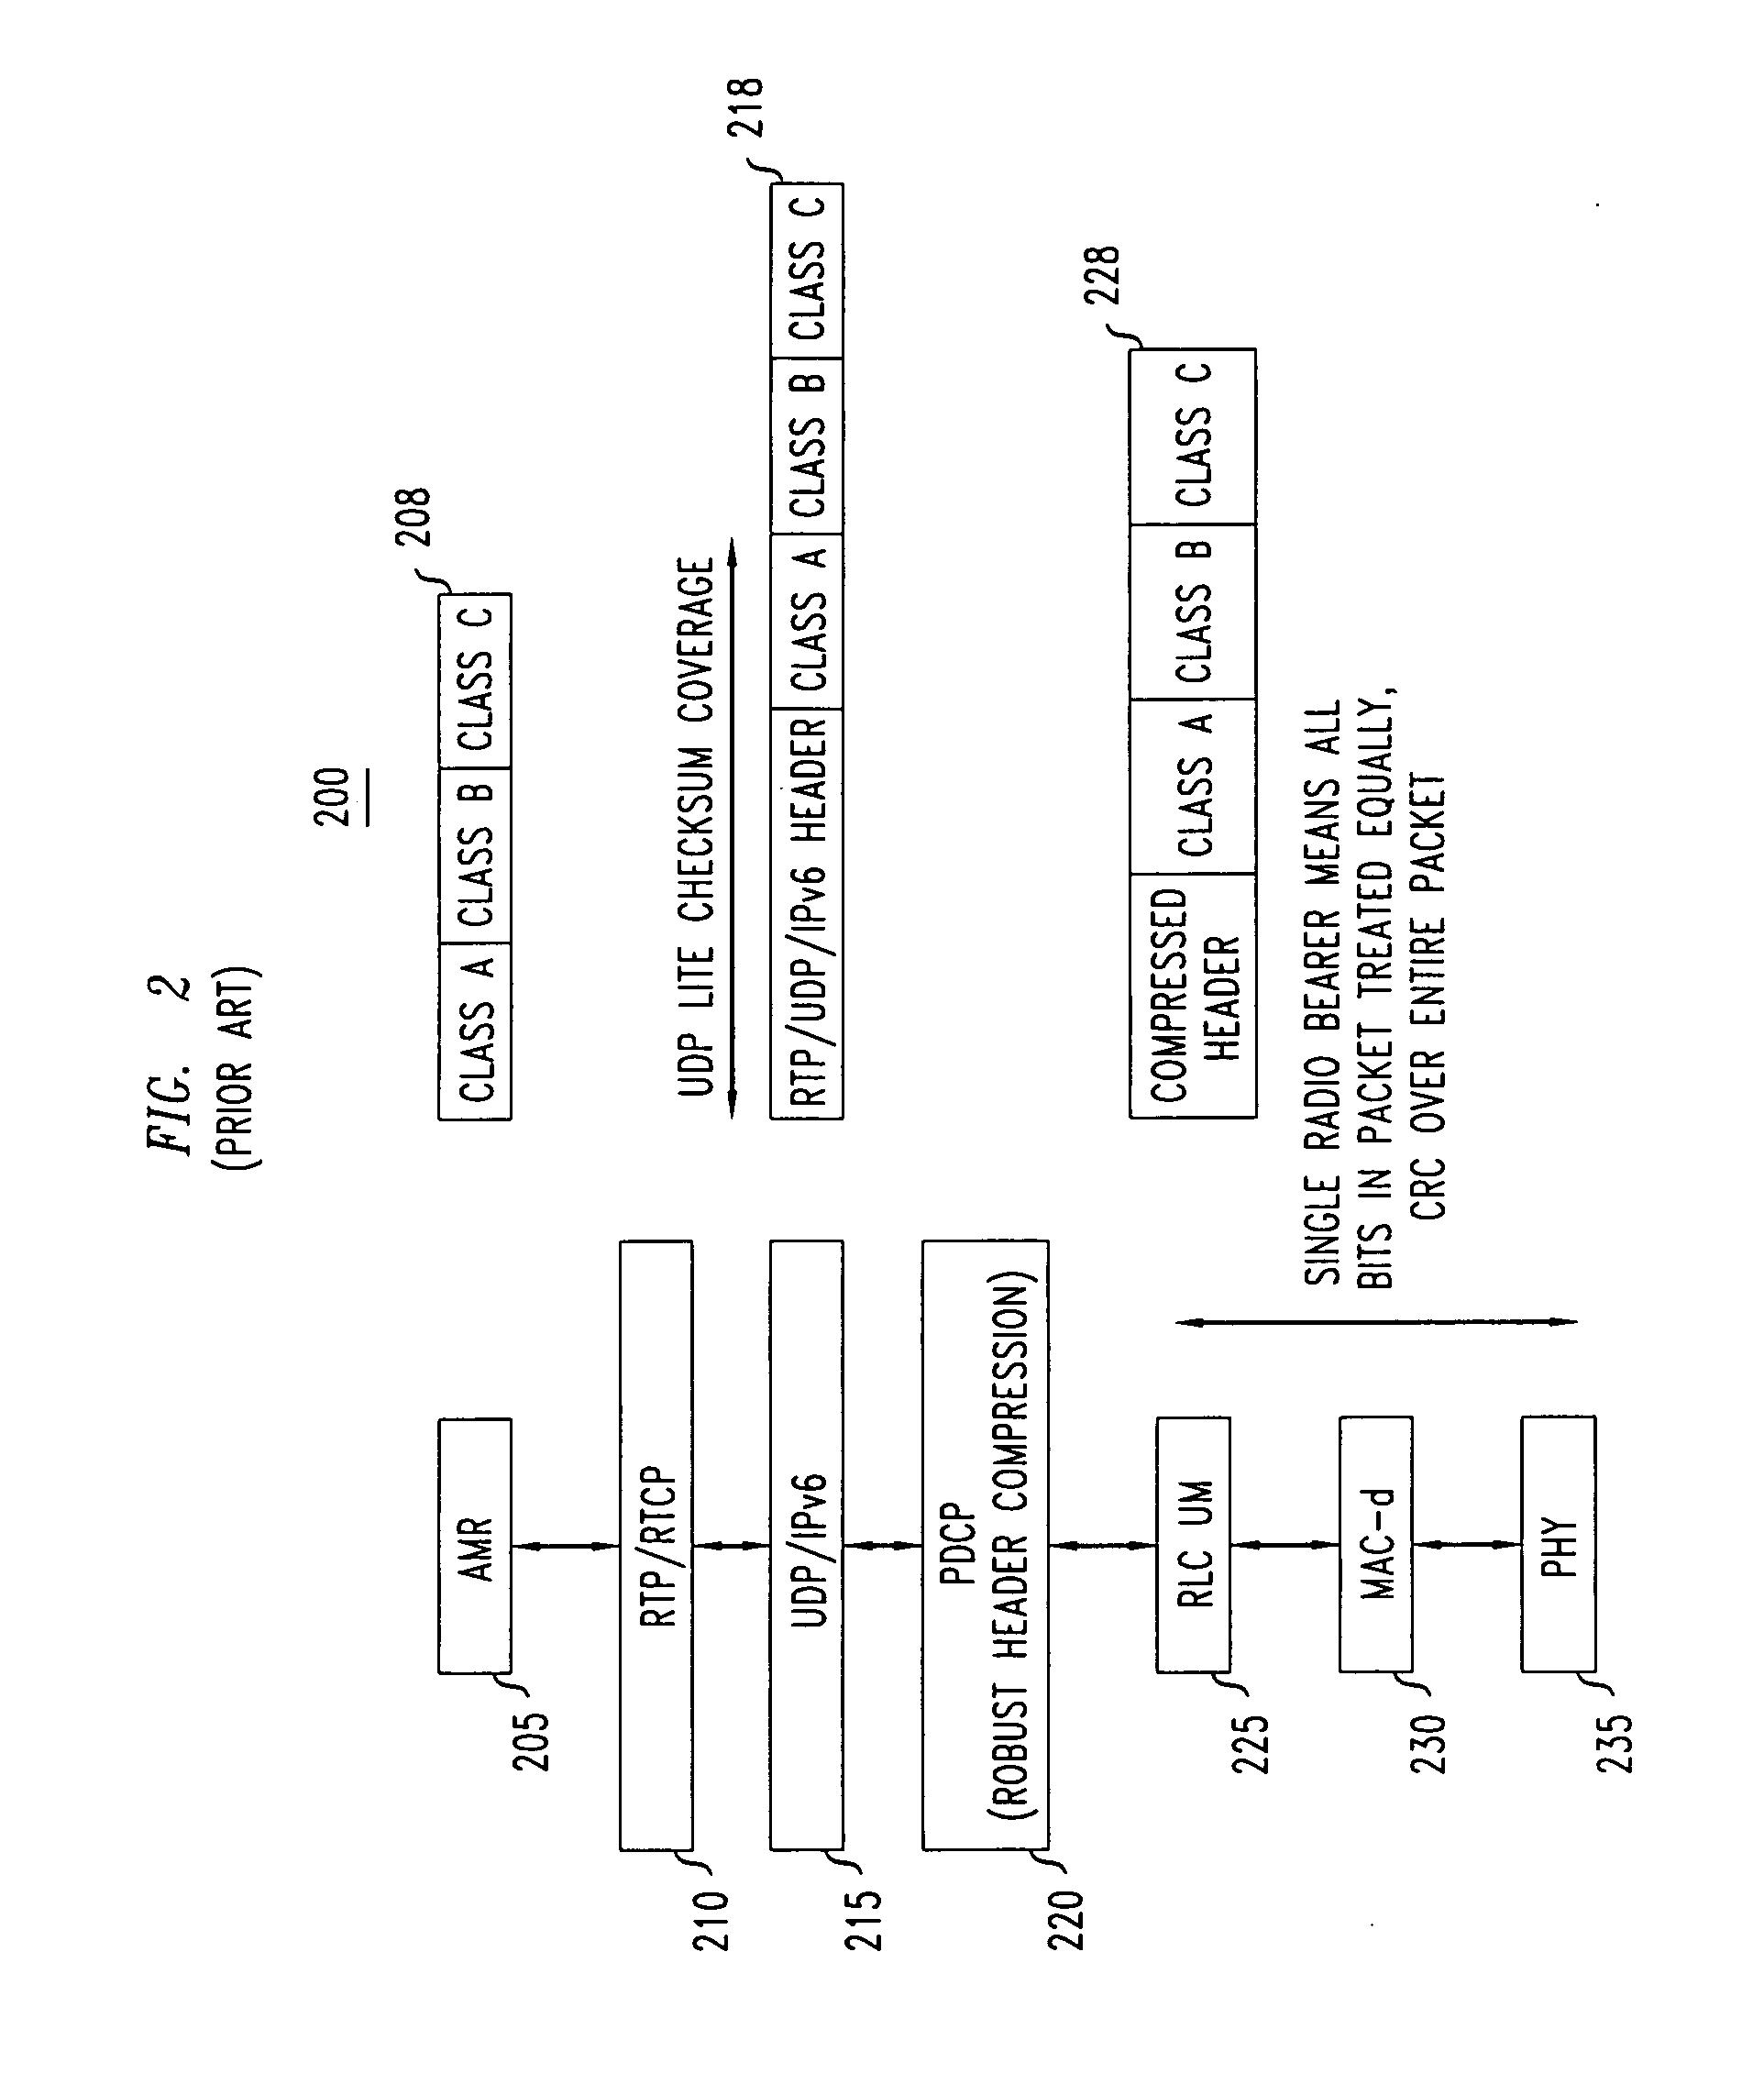 Method to provide unequal error protection and unequal error detection for internet protocol applications